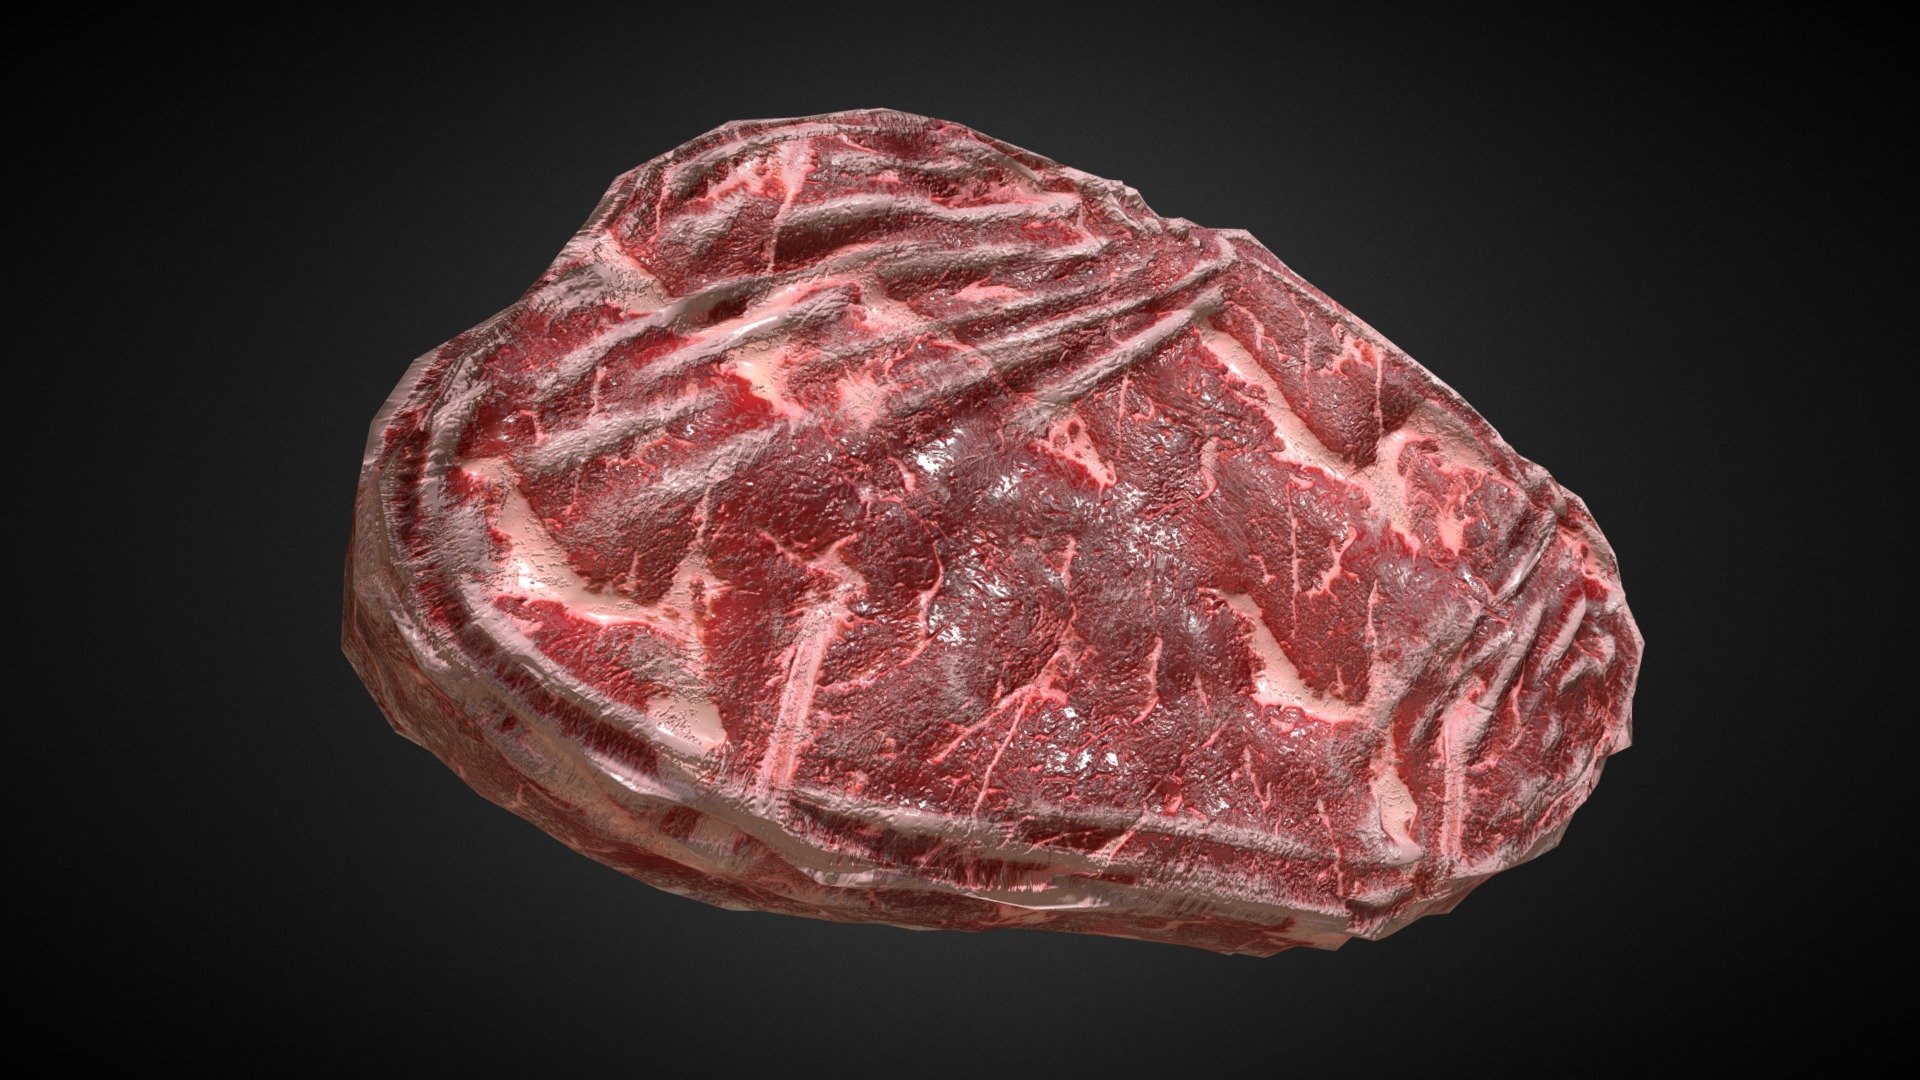 This is a 3d model (not 3d-scanned) of raw steak/beef. It is completely free to use, just please don't sell it 3d model